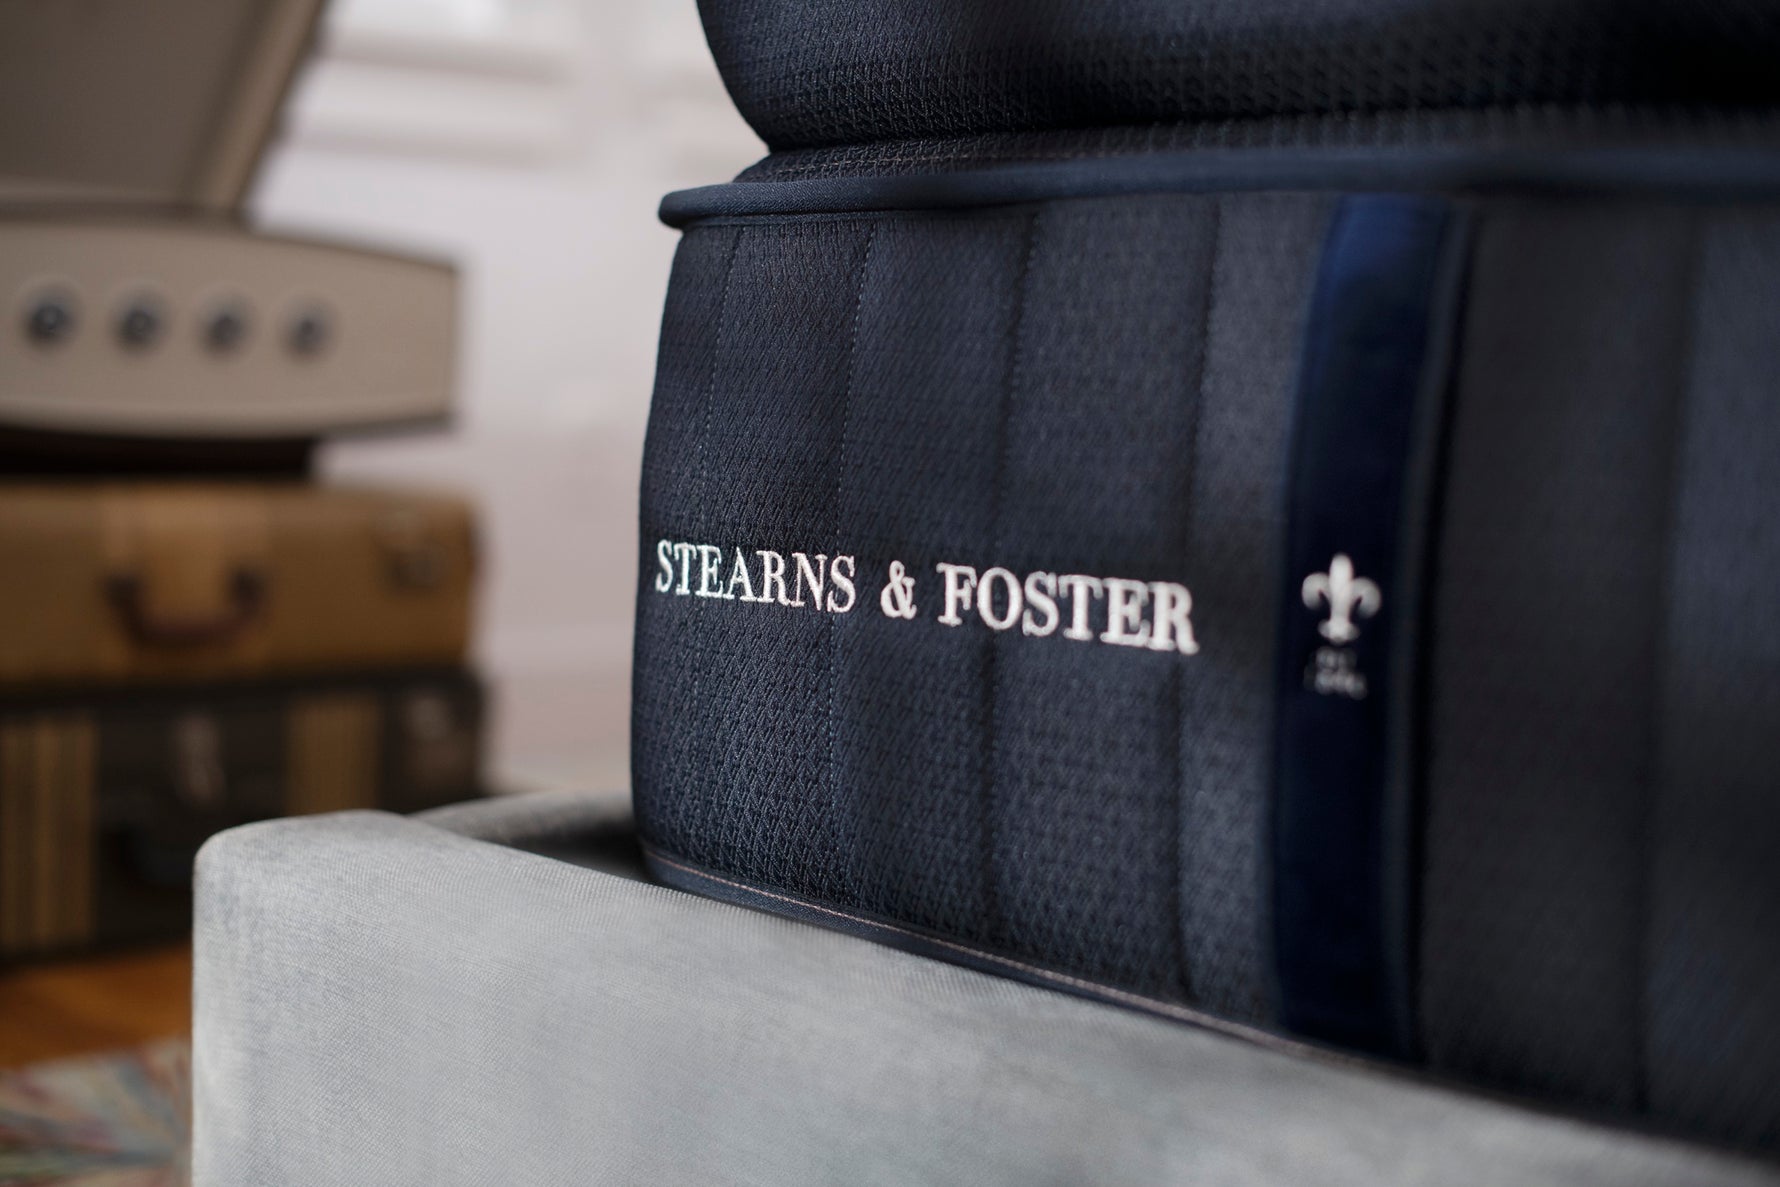 Stearns & Foster Tight Top Firm - Tiendas Relax